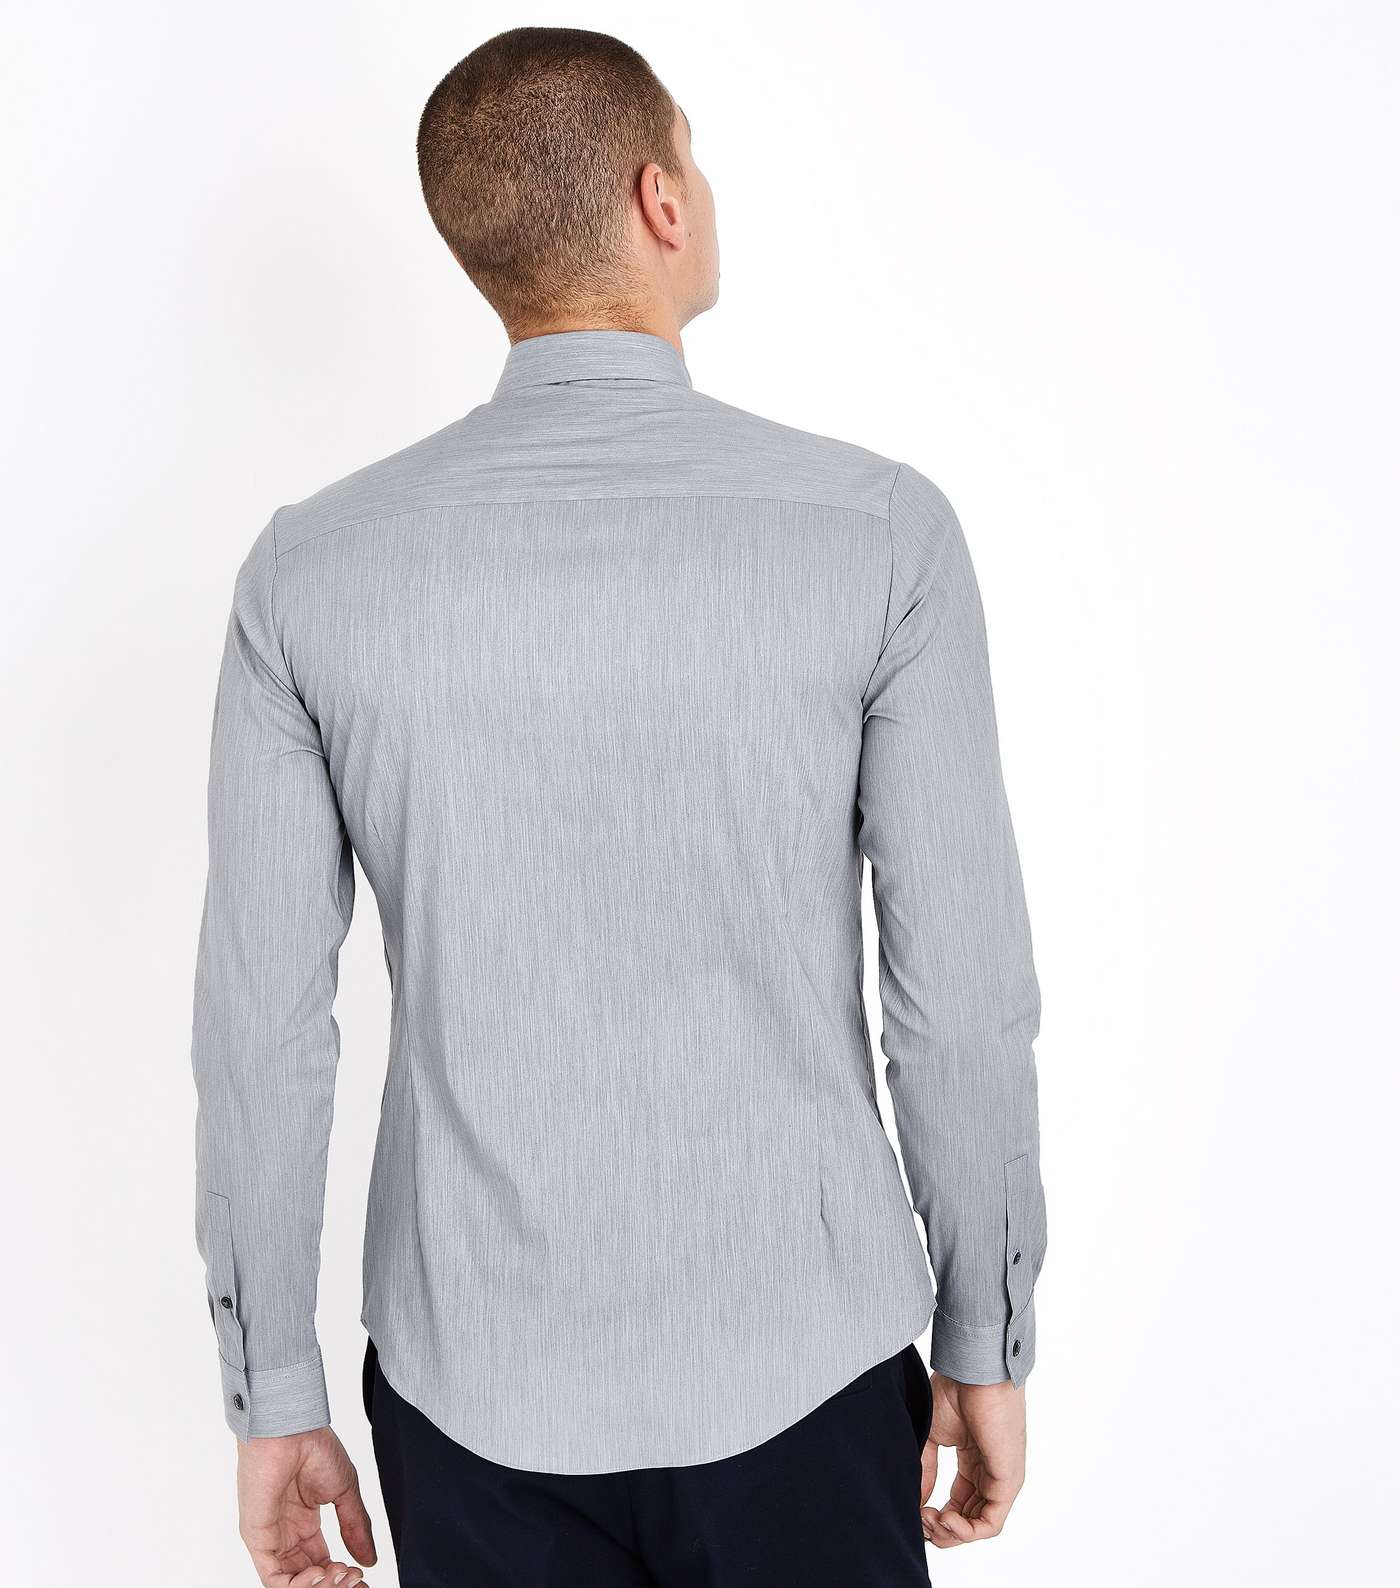 Pale Grey Muscle Fit Stretch Shirt Image 3